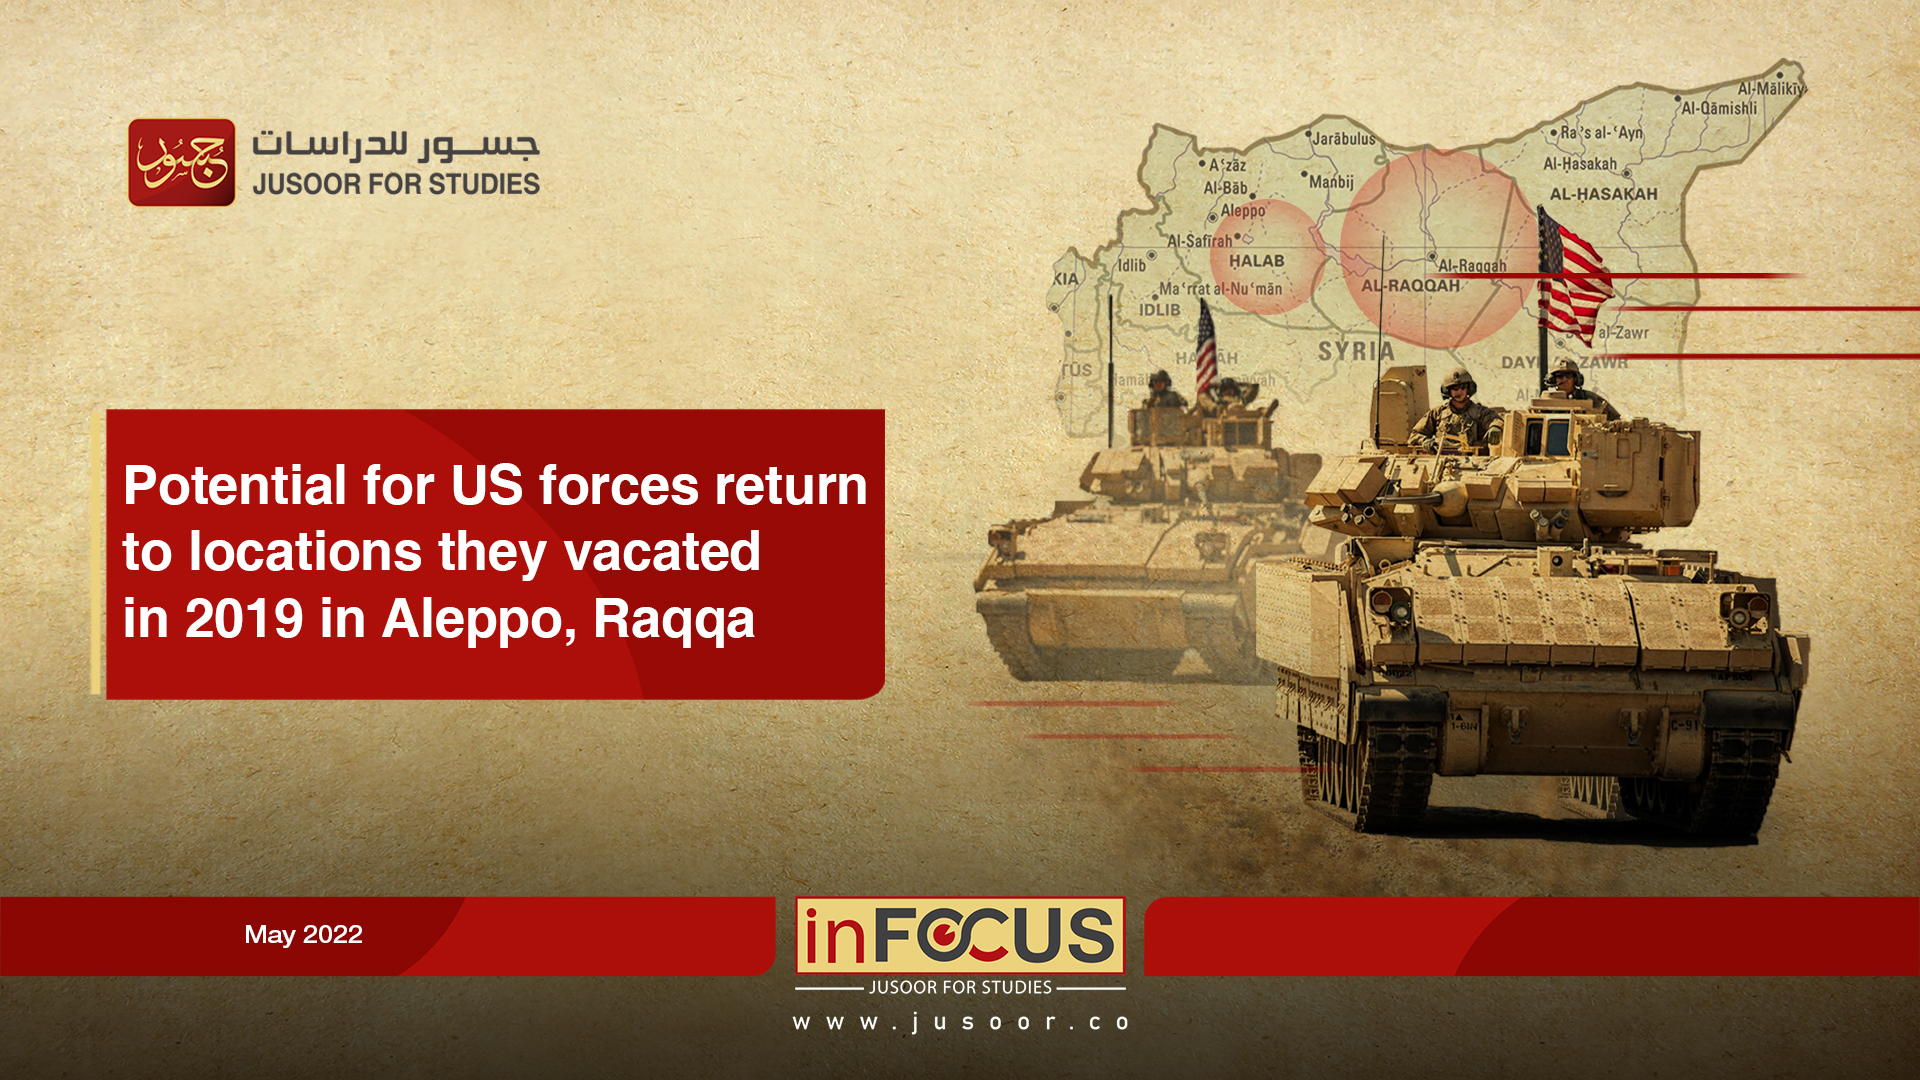 Potential for US forces return to locations they vacated in 2019 in Aleppo, Raqqa